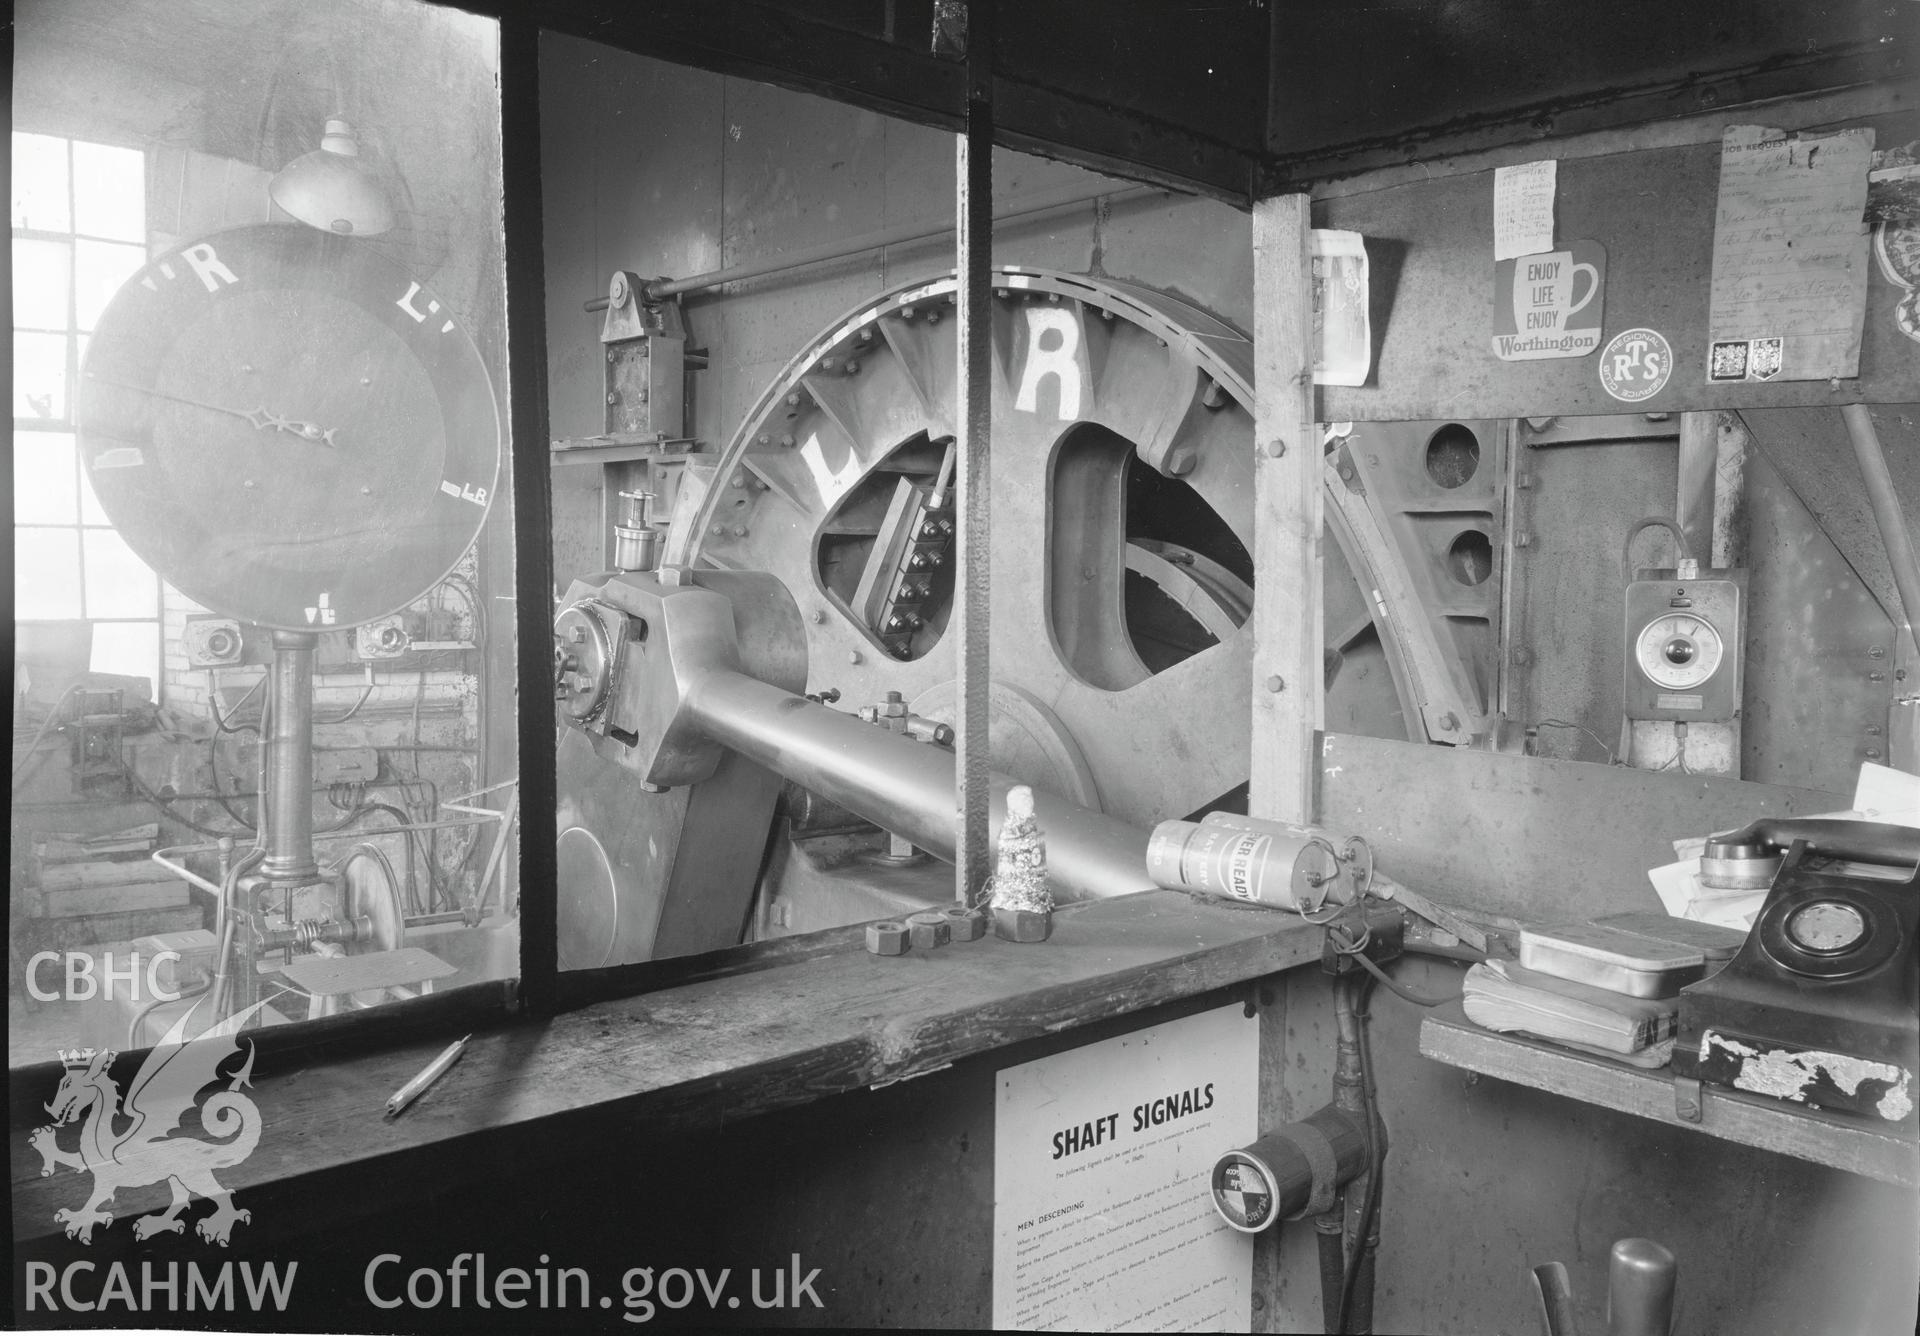 Digital copy of an acetate negative showing steam winder from windingman's cabin at Cefncoed Colliery, from the John Cornwell Collection.